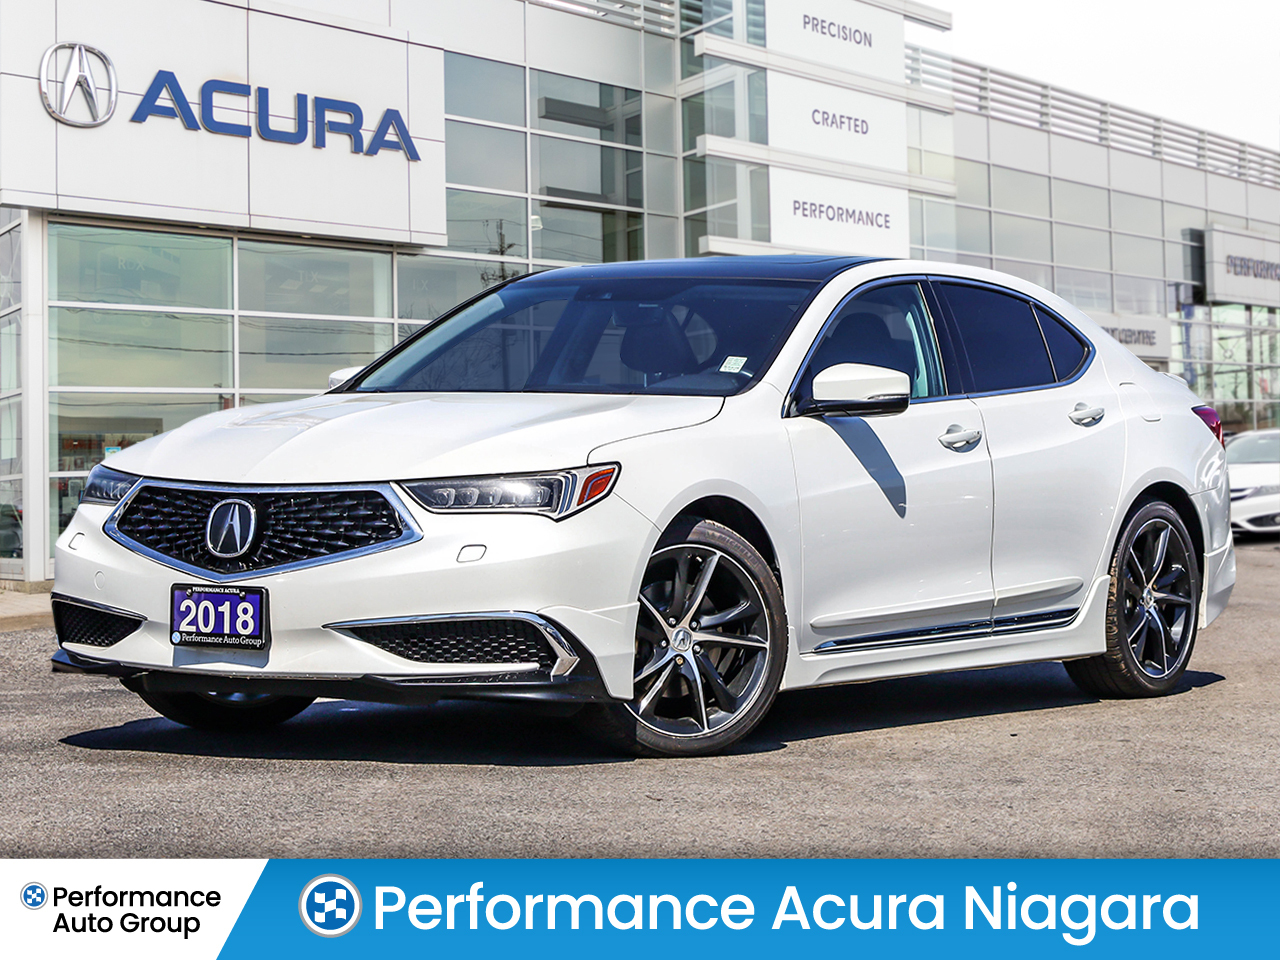 2018 Acura TLX SOLD - PENDING DELIVERY